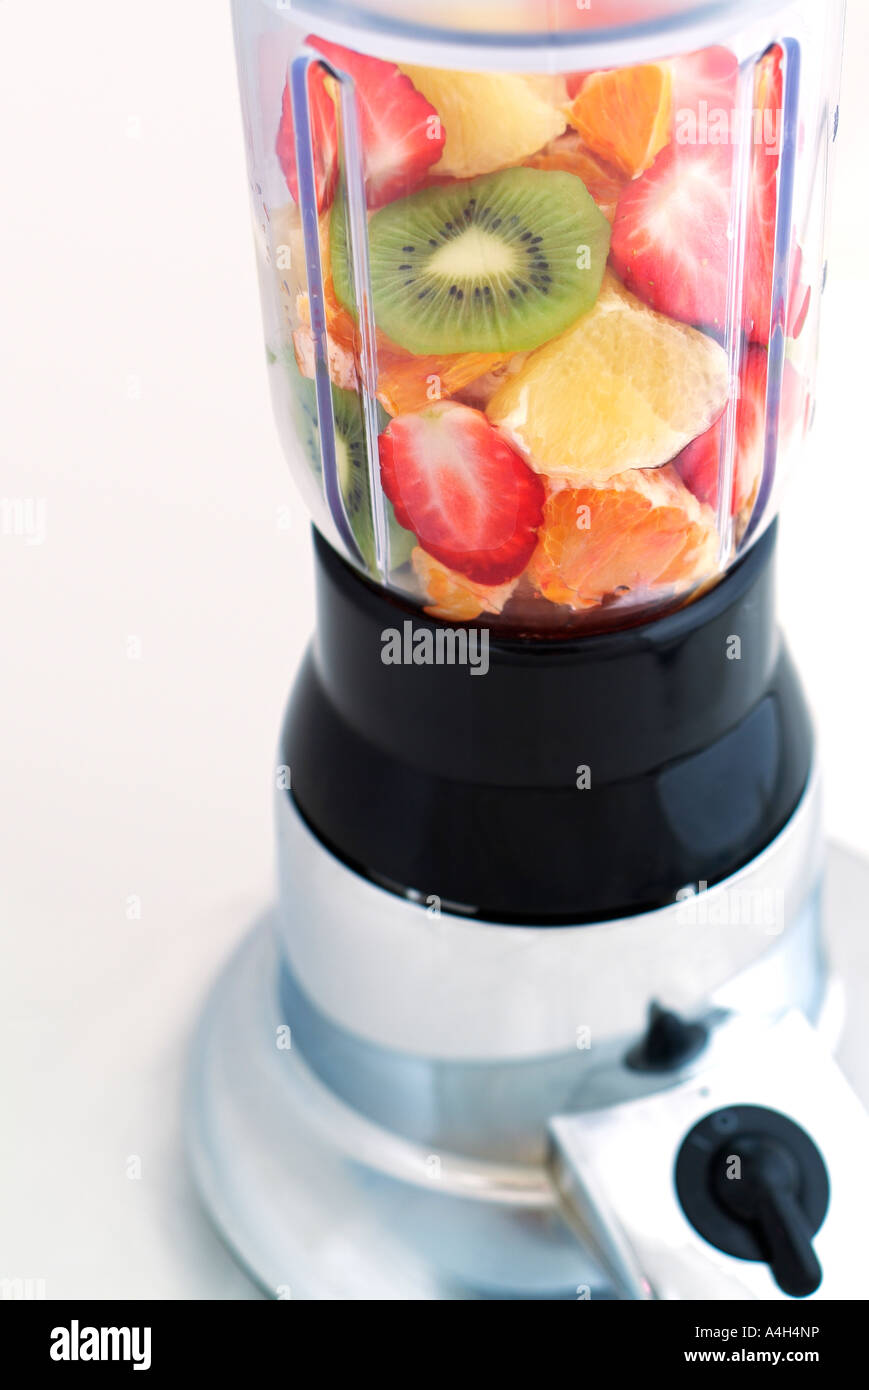 Mixed Fruit in a Blender Ready to be made into a Healthy and Refreshing Drink Stock Photo